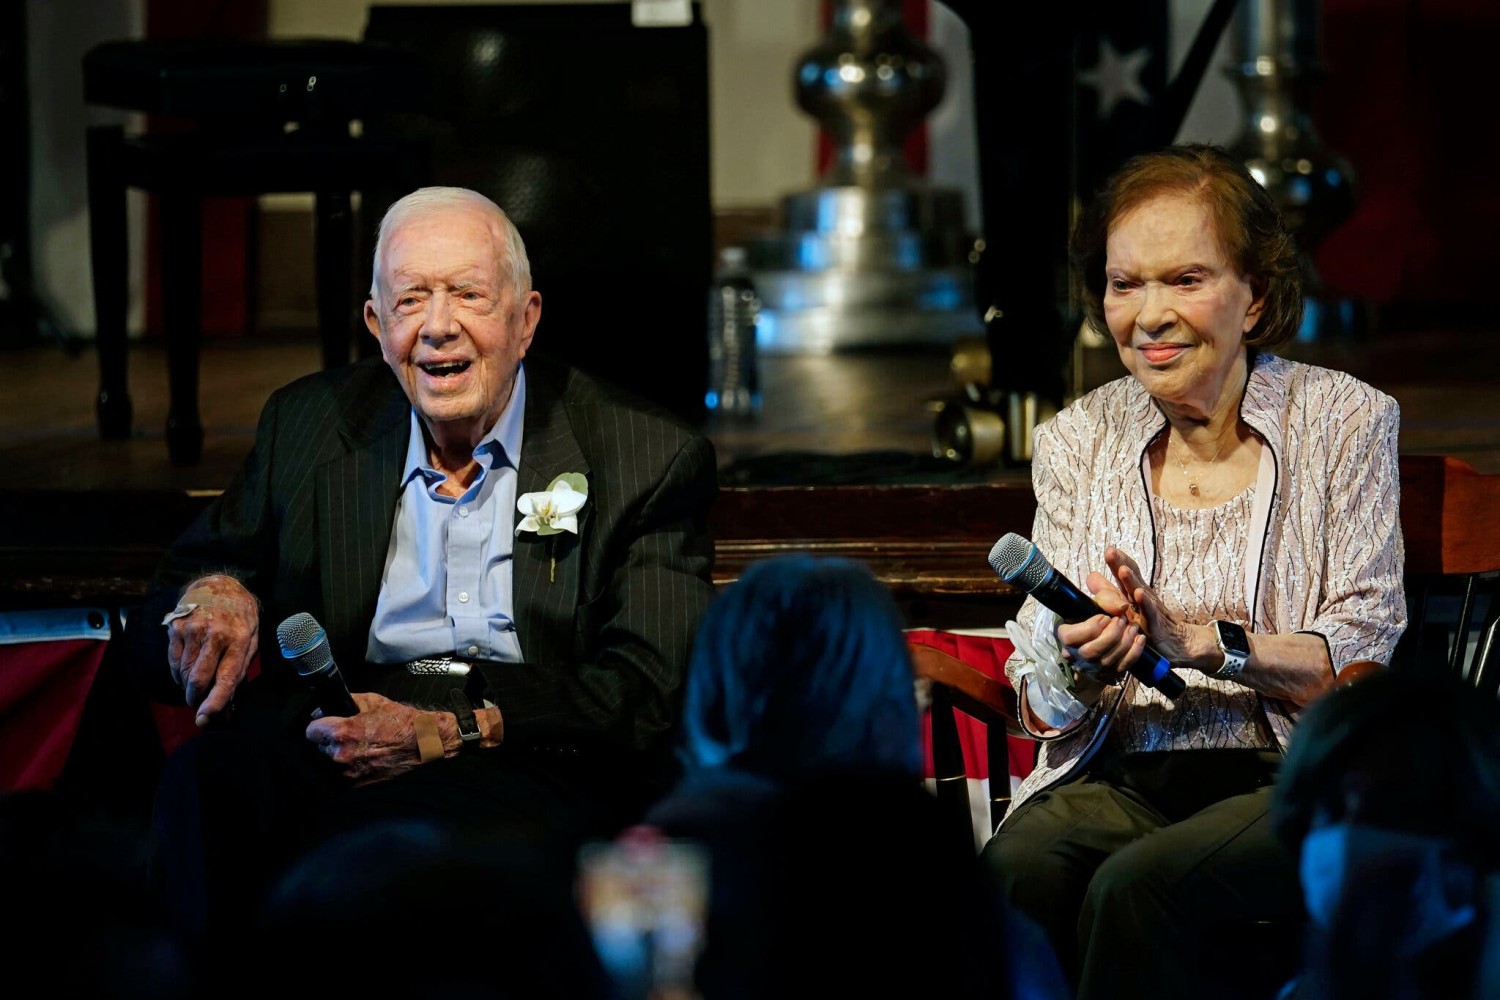 Jimmy Carter, 6 Months Into Hospice, Is Still ‘Very Much’ Himself, Grandson Says